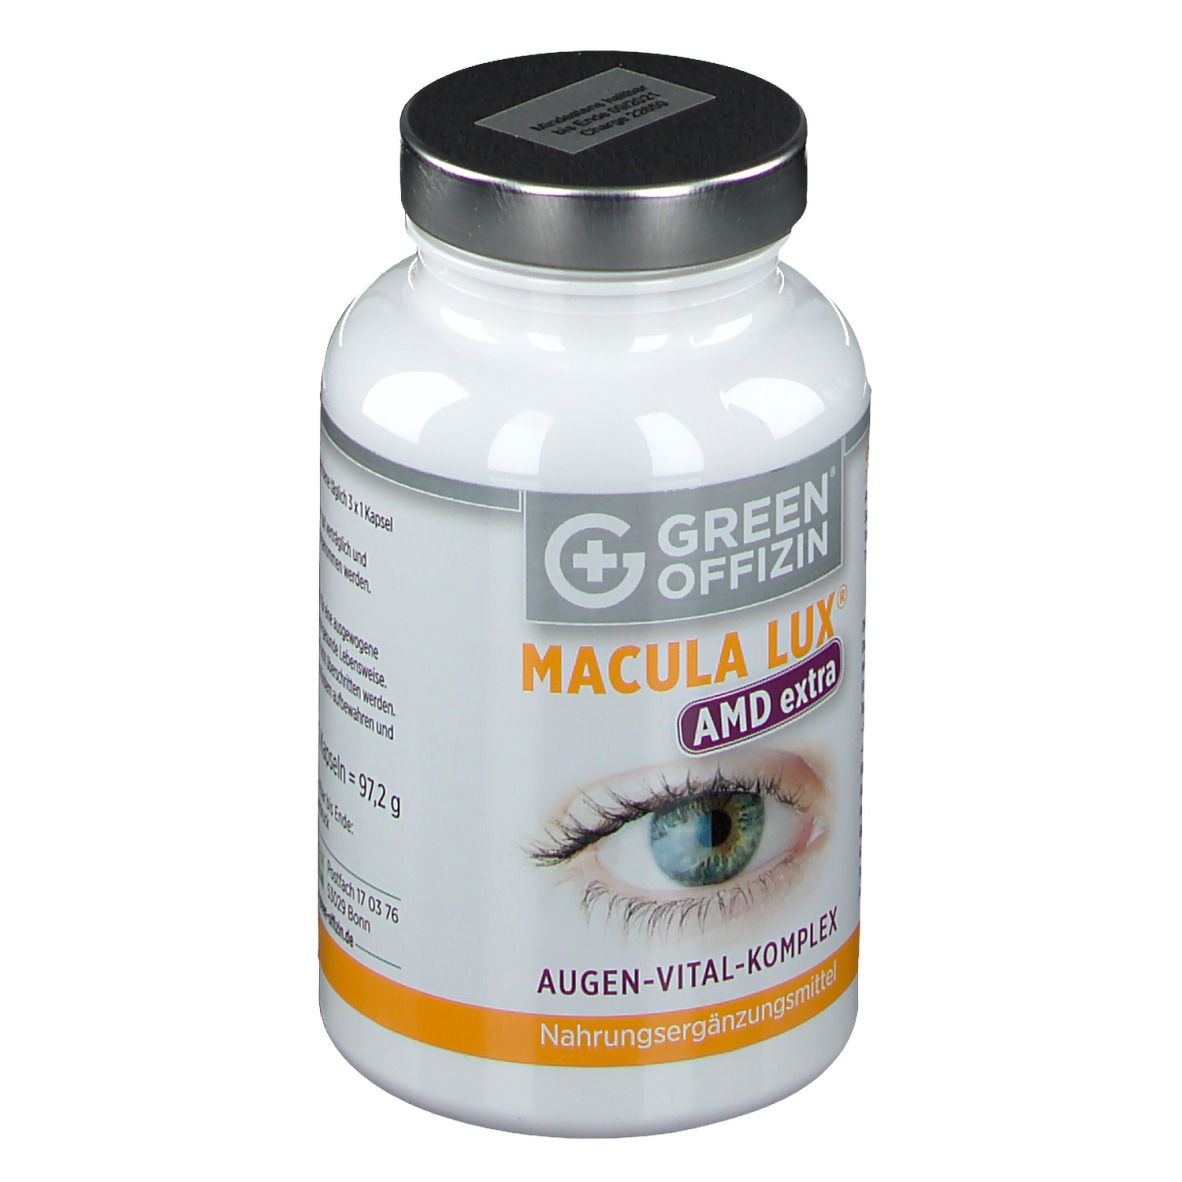 MACULA LUX® AMD extra